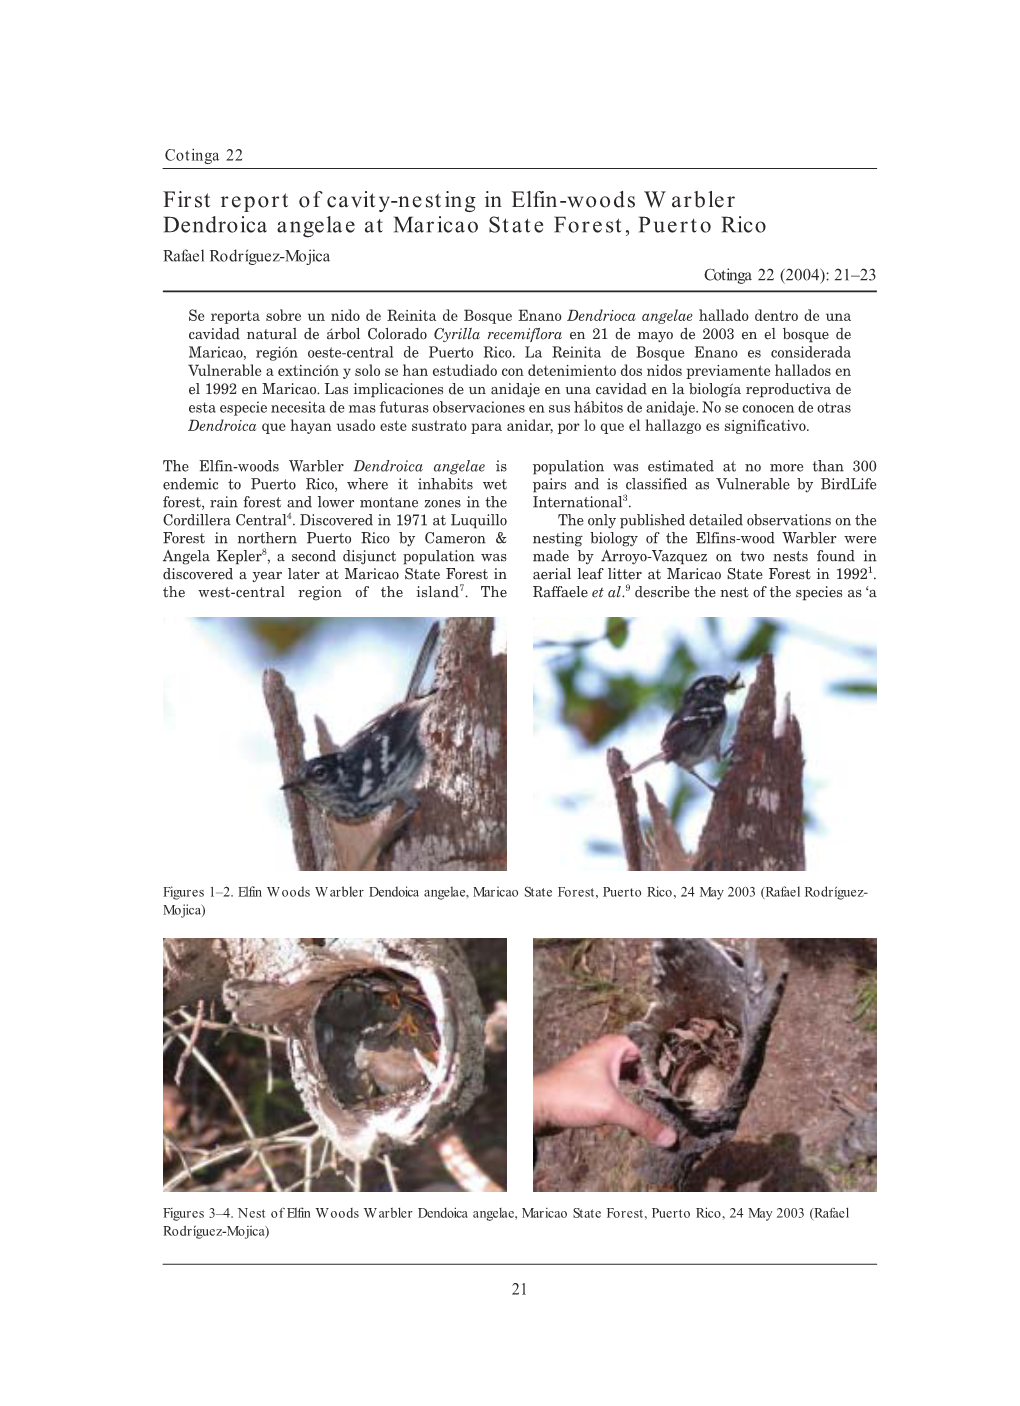 First Report of Cavity-Nesting in Elfin-Woods Warbler Dendroica Angelae at Maricao State Forest, Puerto Rico Rafael Rodríguez-Mojica Cotinga 22 (2004): 21–23